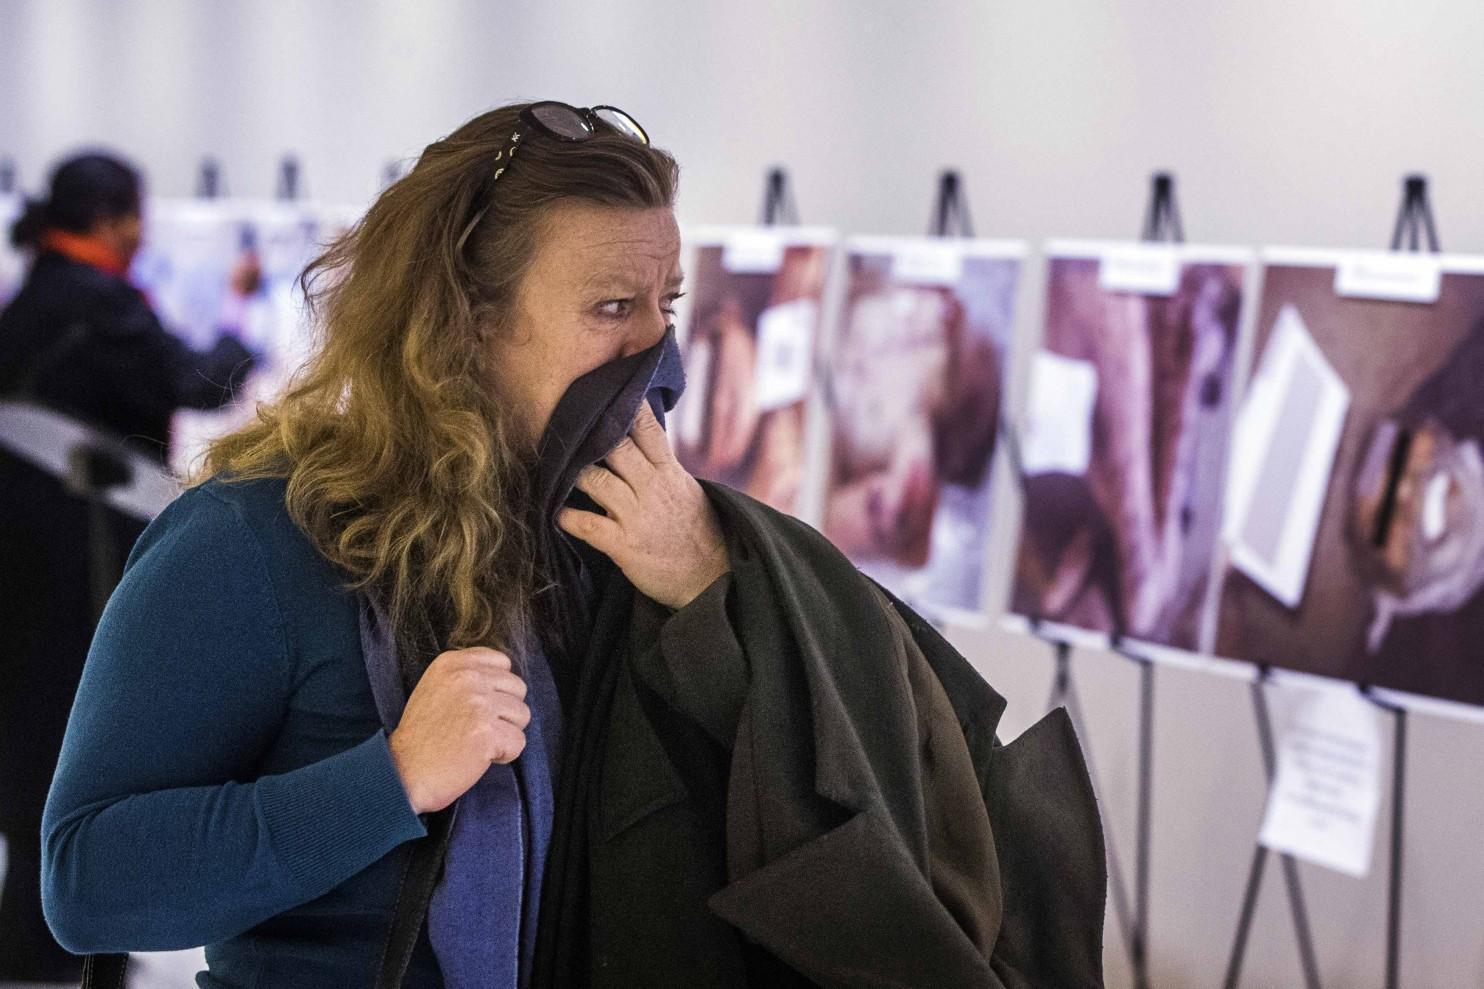 Images of torture victims and dead bodies on display at the UN in New York